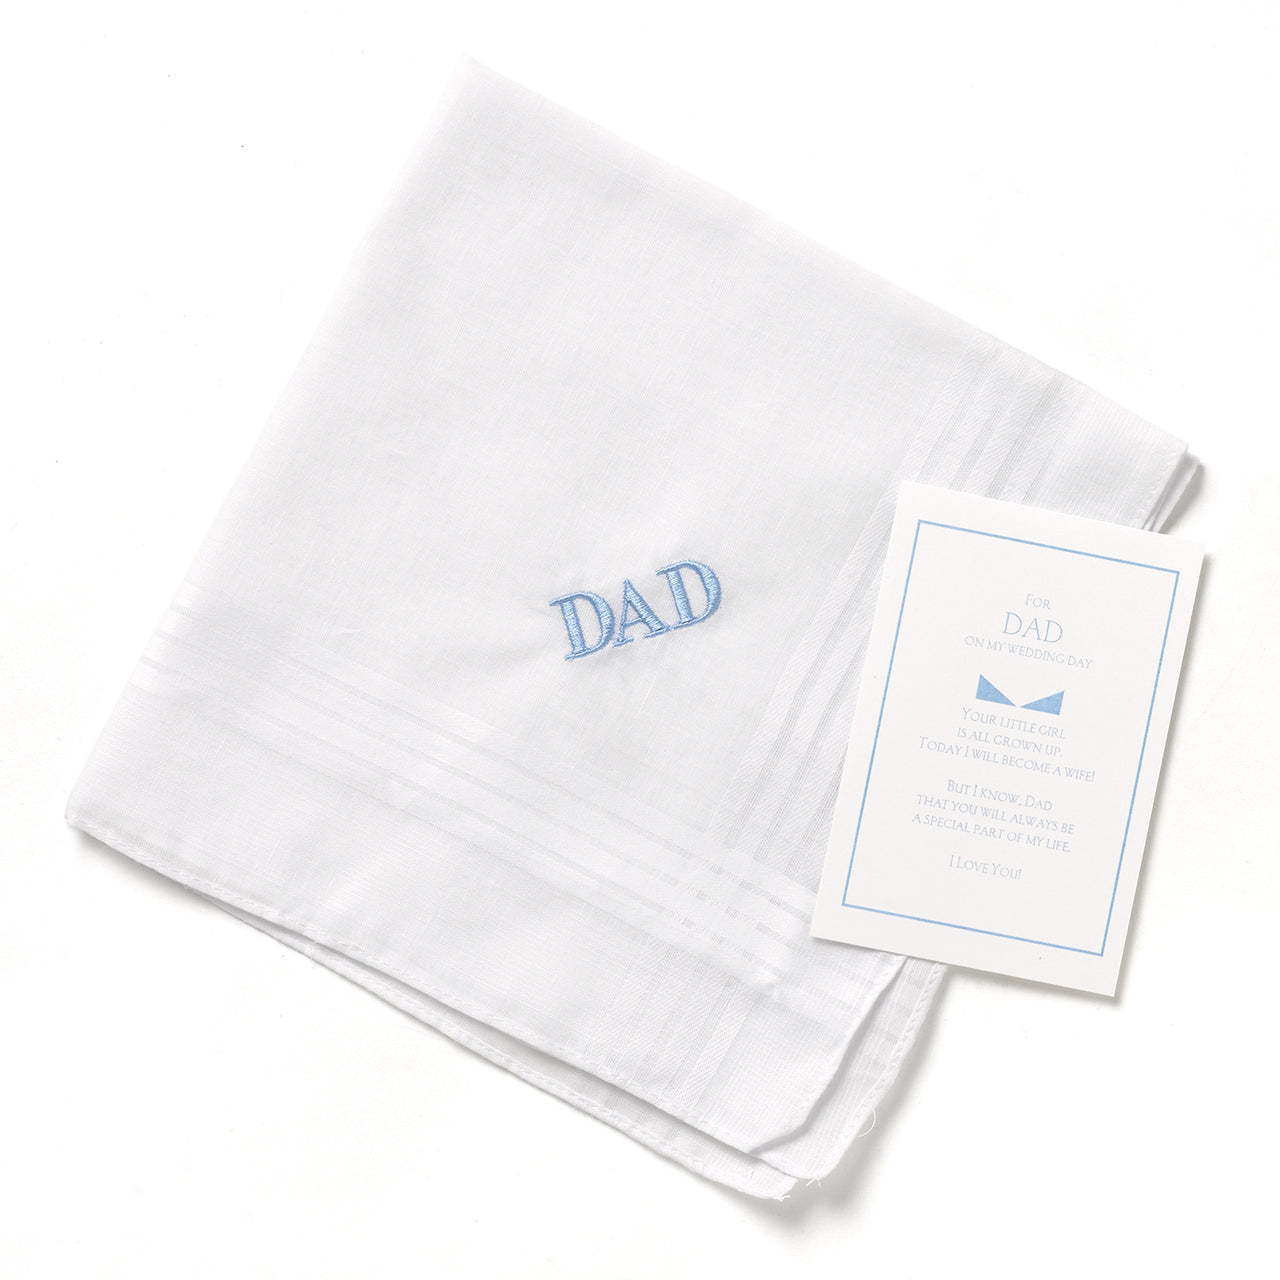 Dad Embroidered Handkerchief - Main Image | My Wedding Favors